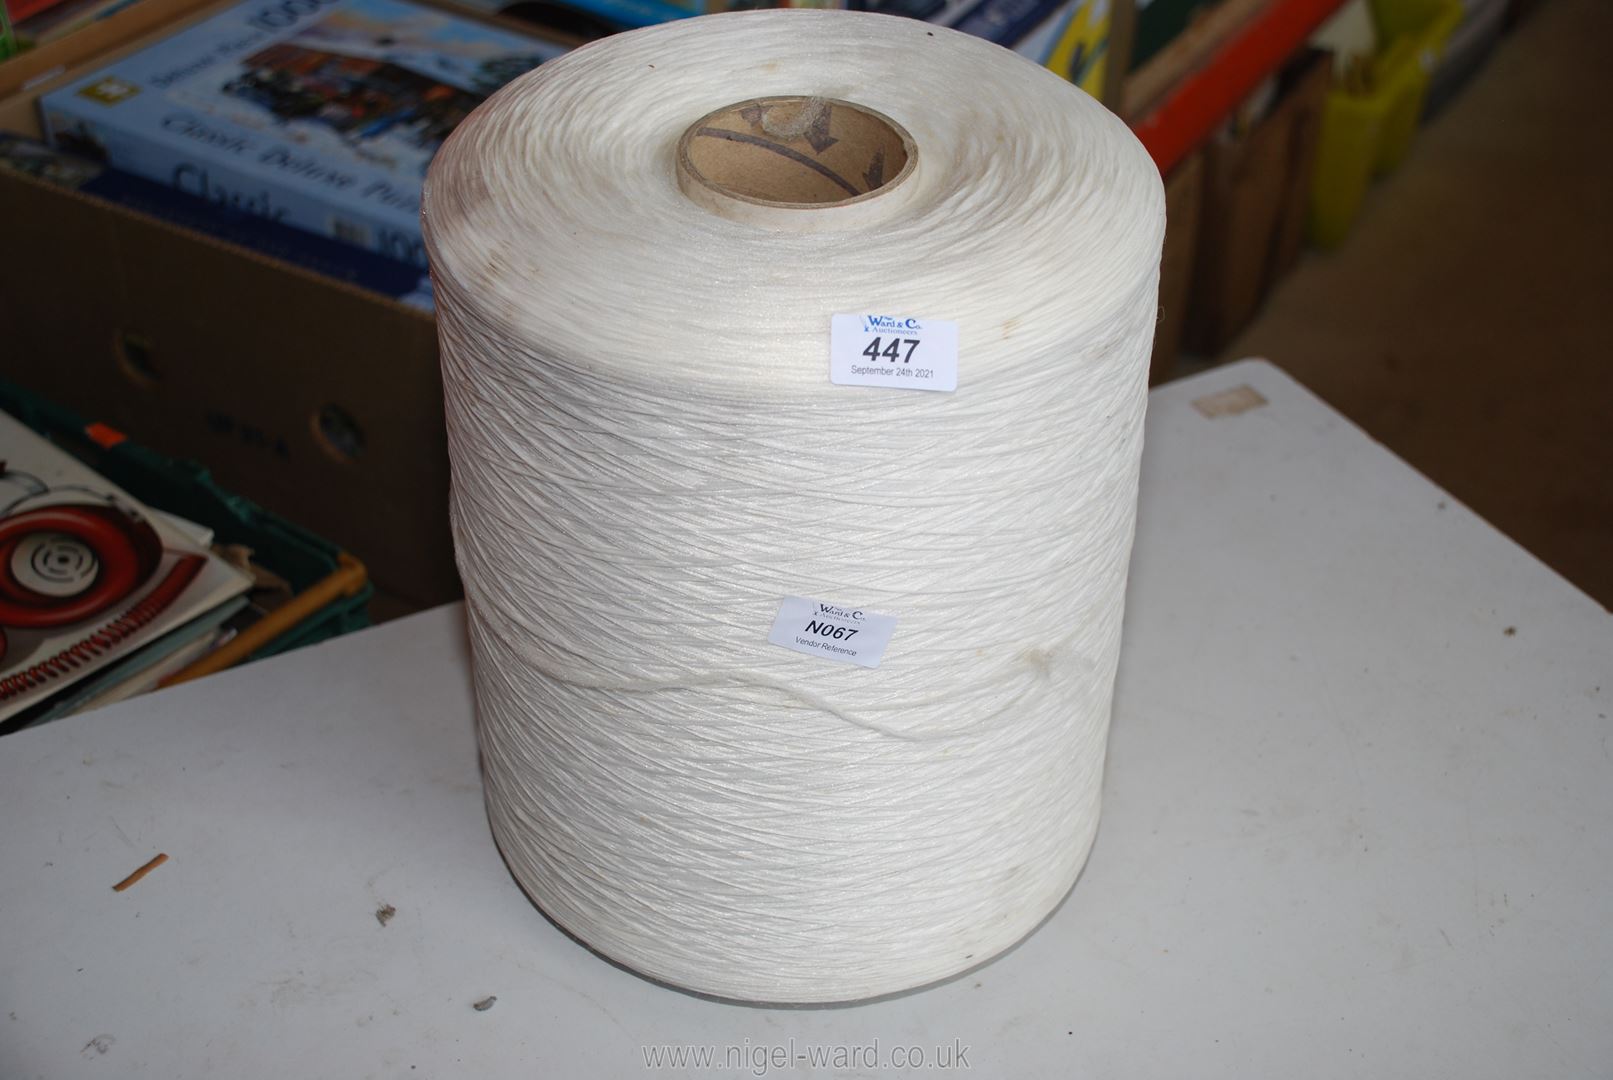 Large coil of white synthetic thread.